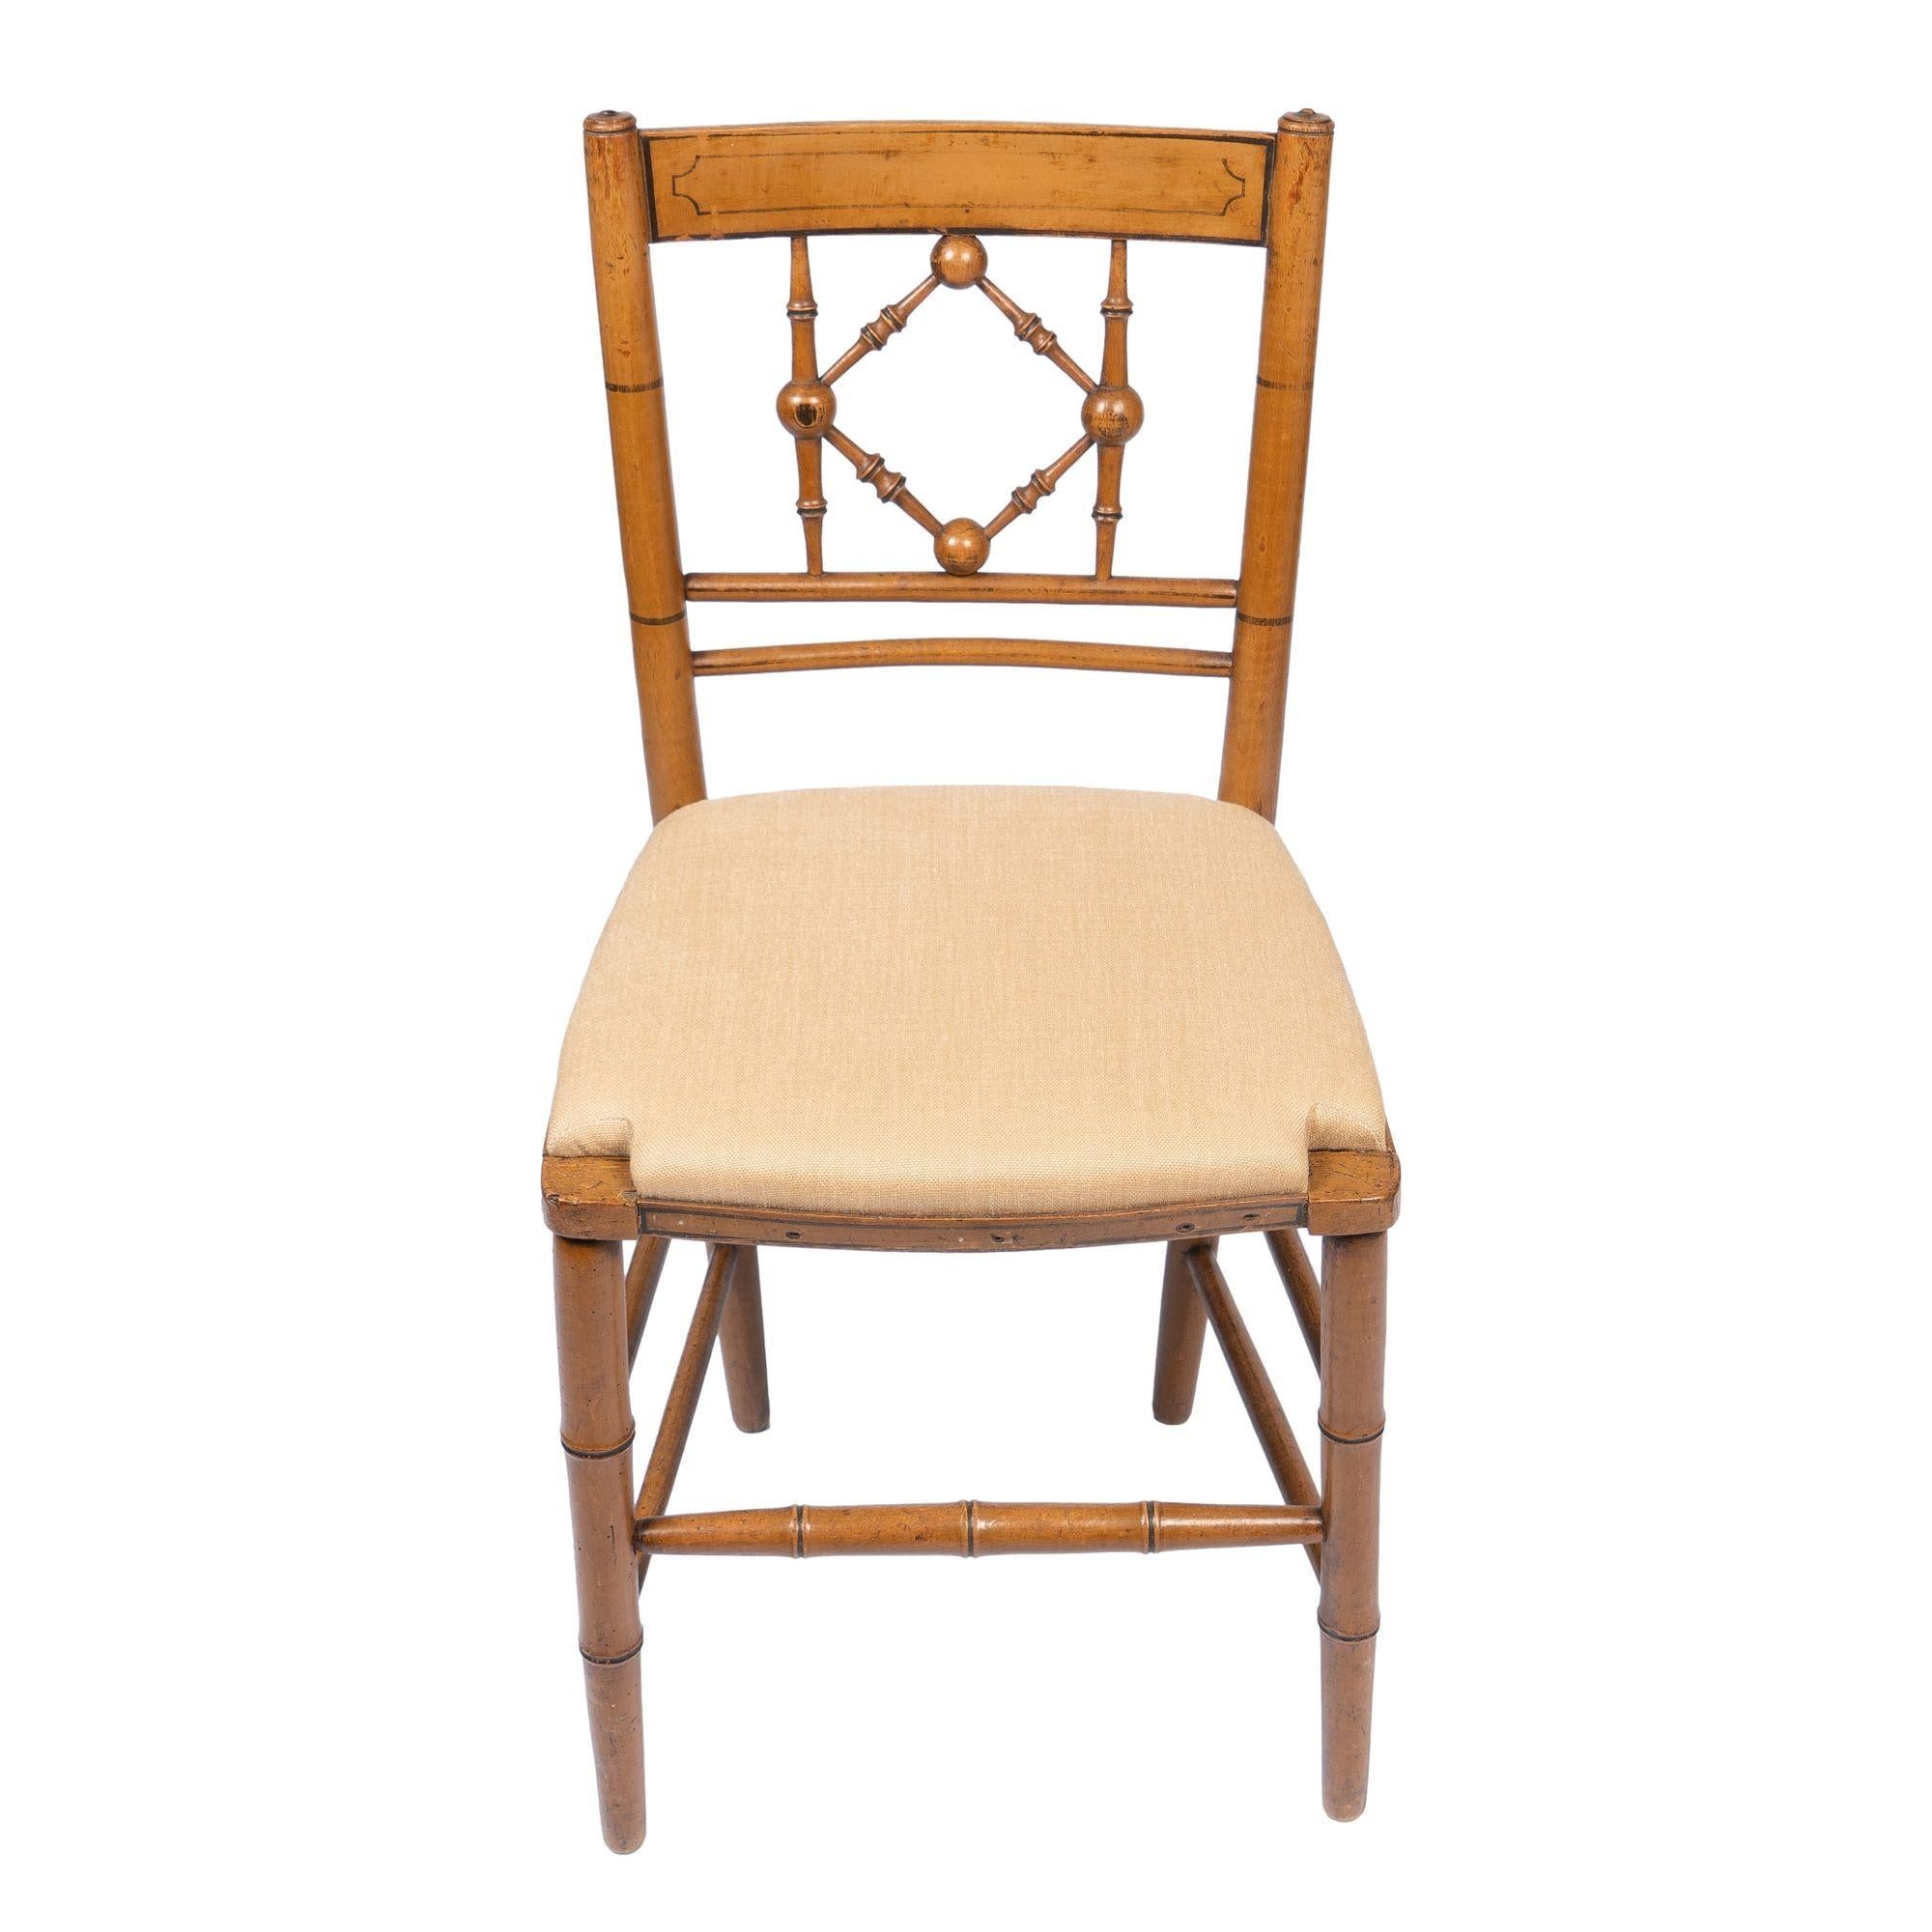 American Sheraton Painted Side Chairs with Upholstered Seats, 1800 6